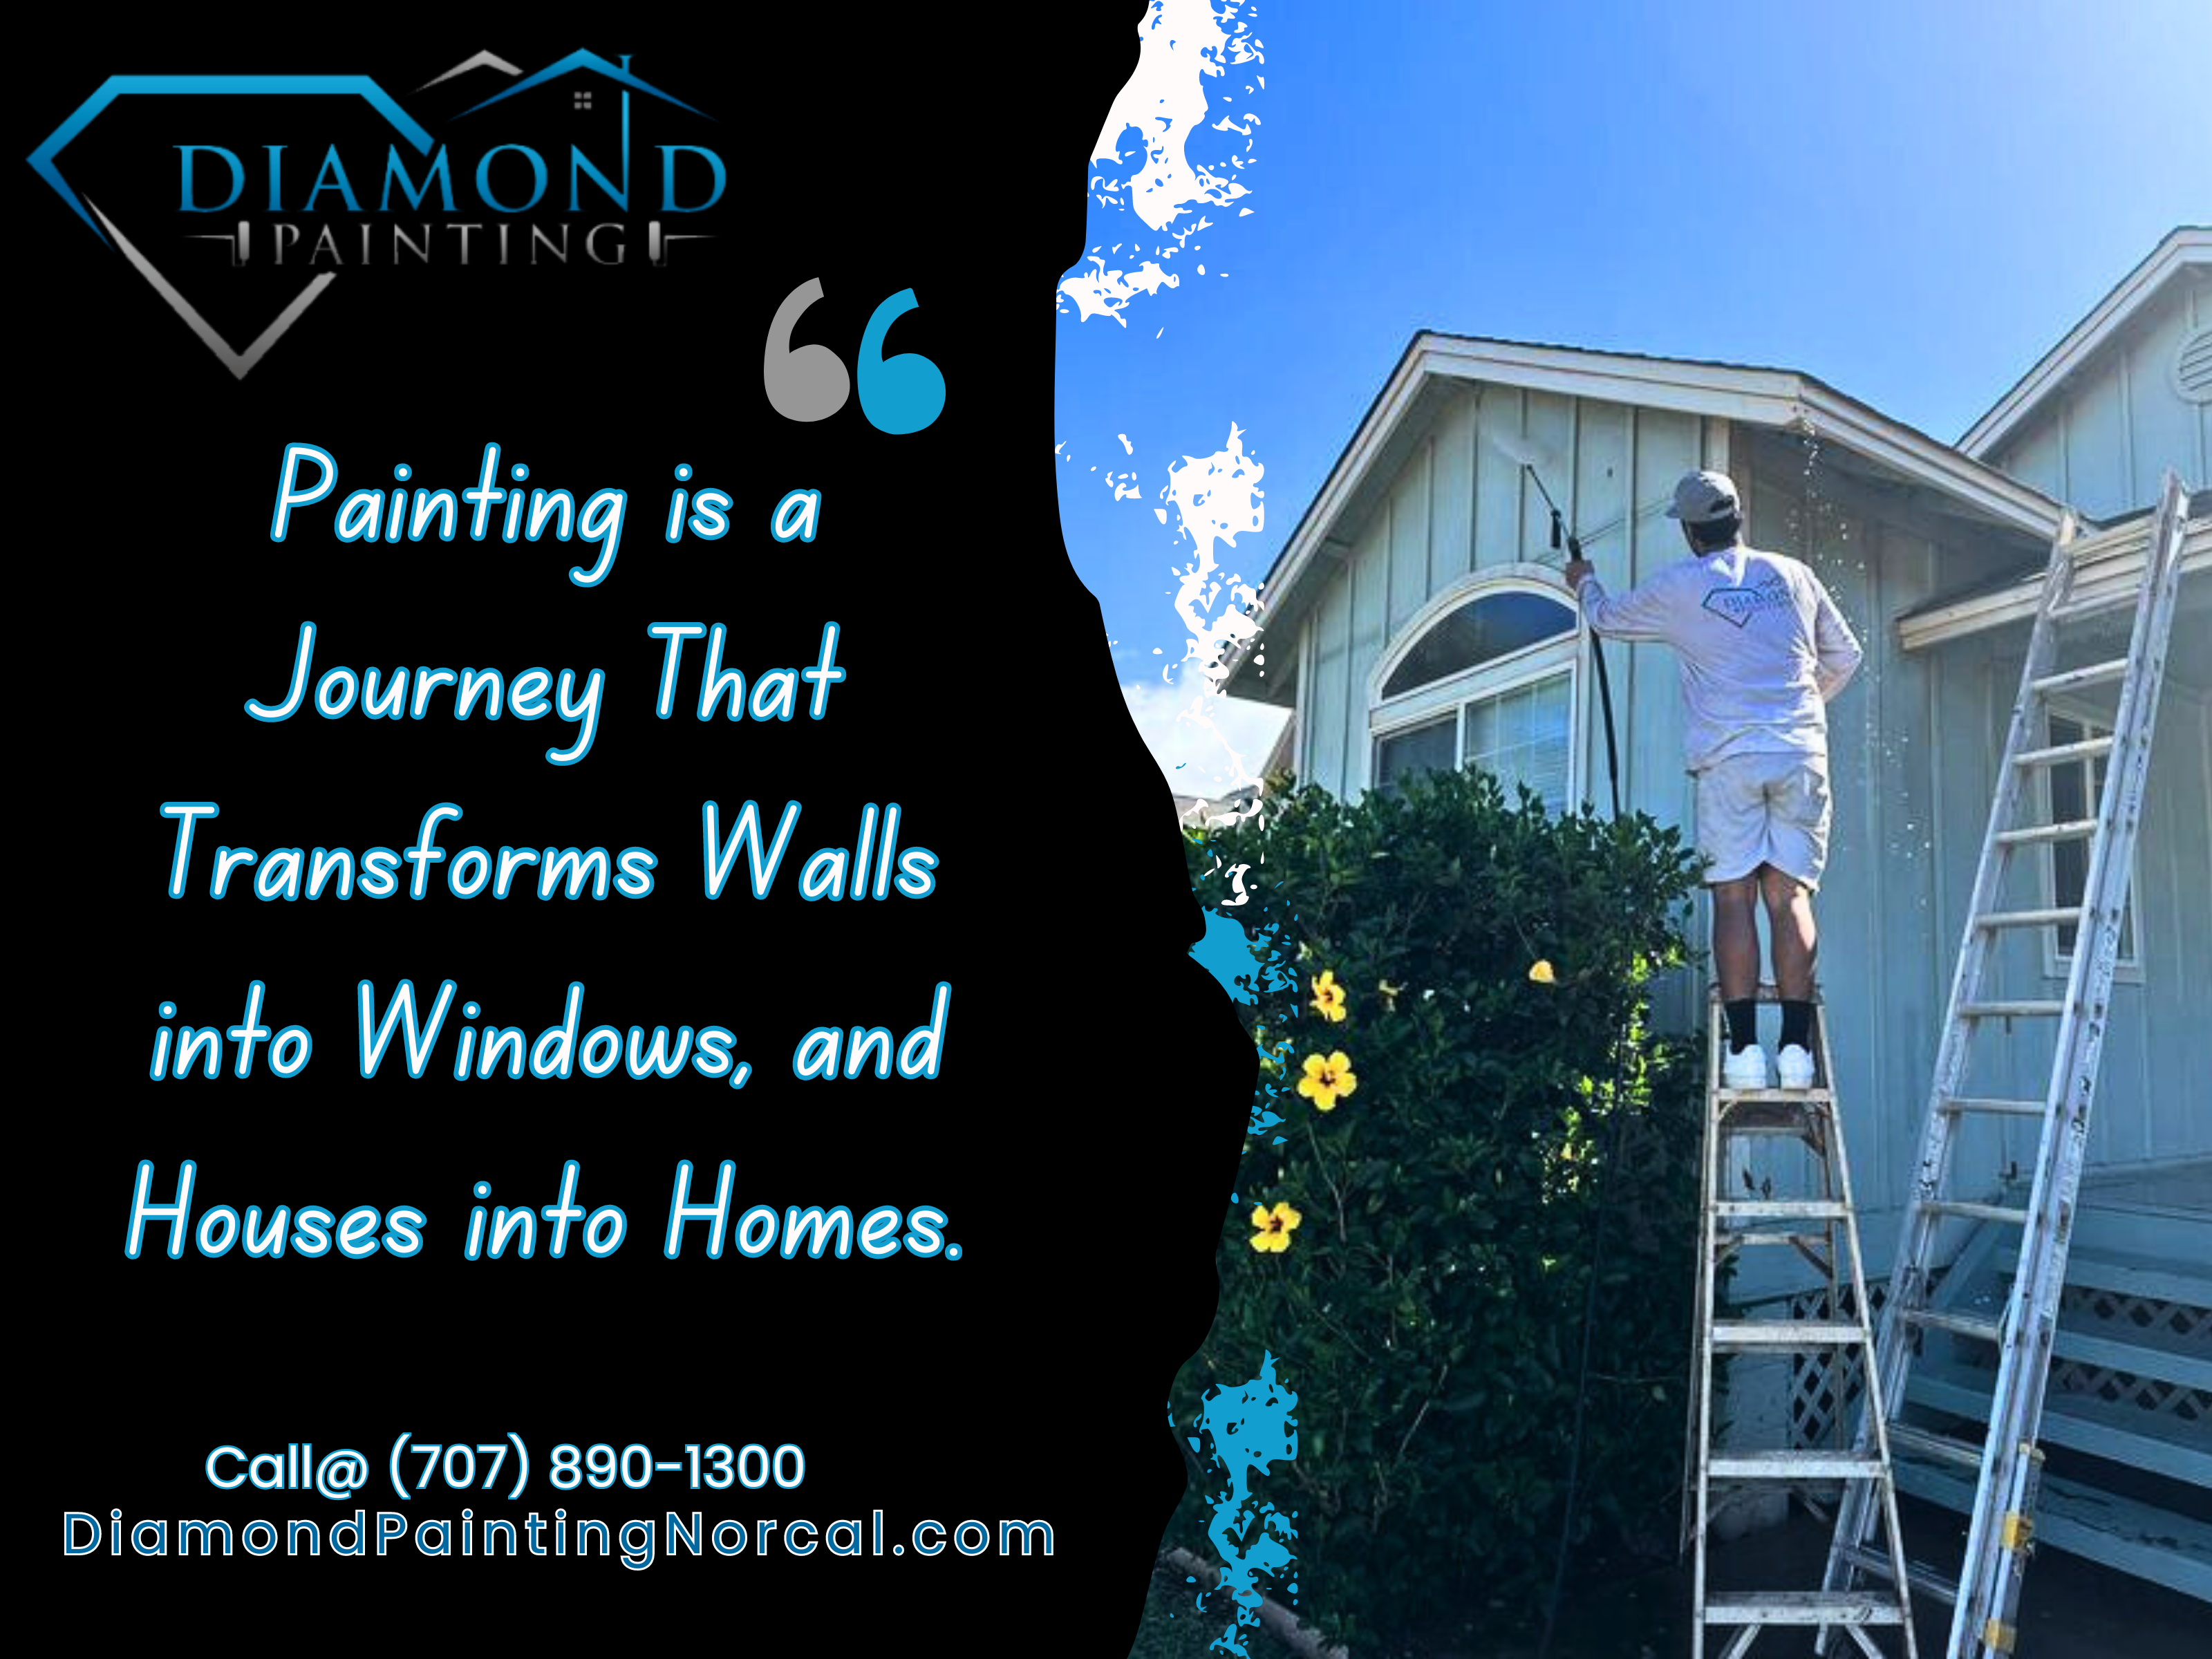 Painting is a Journey that Transforms Walls into Windows, and Houses into Homes